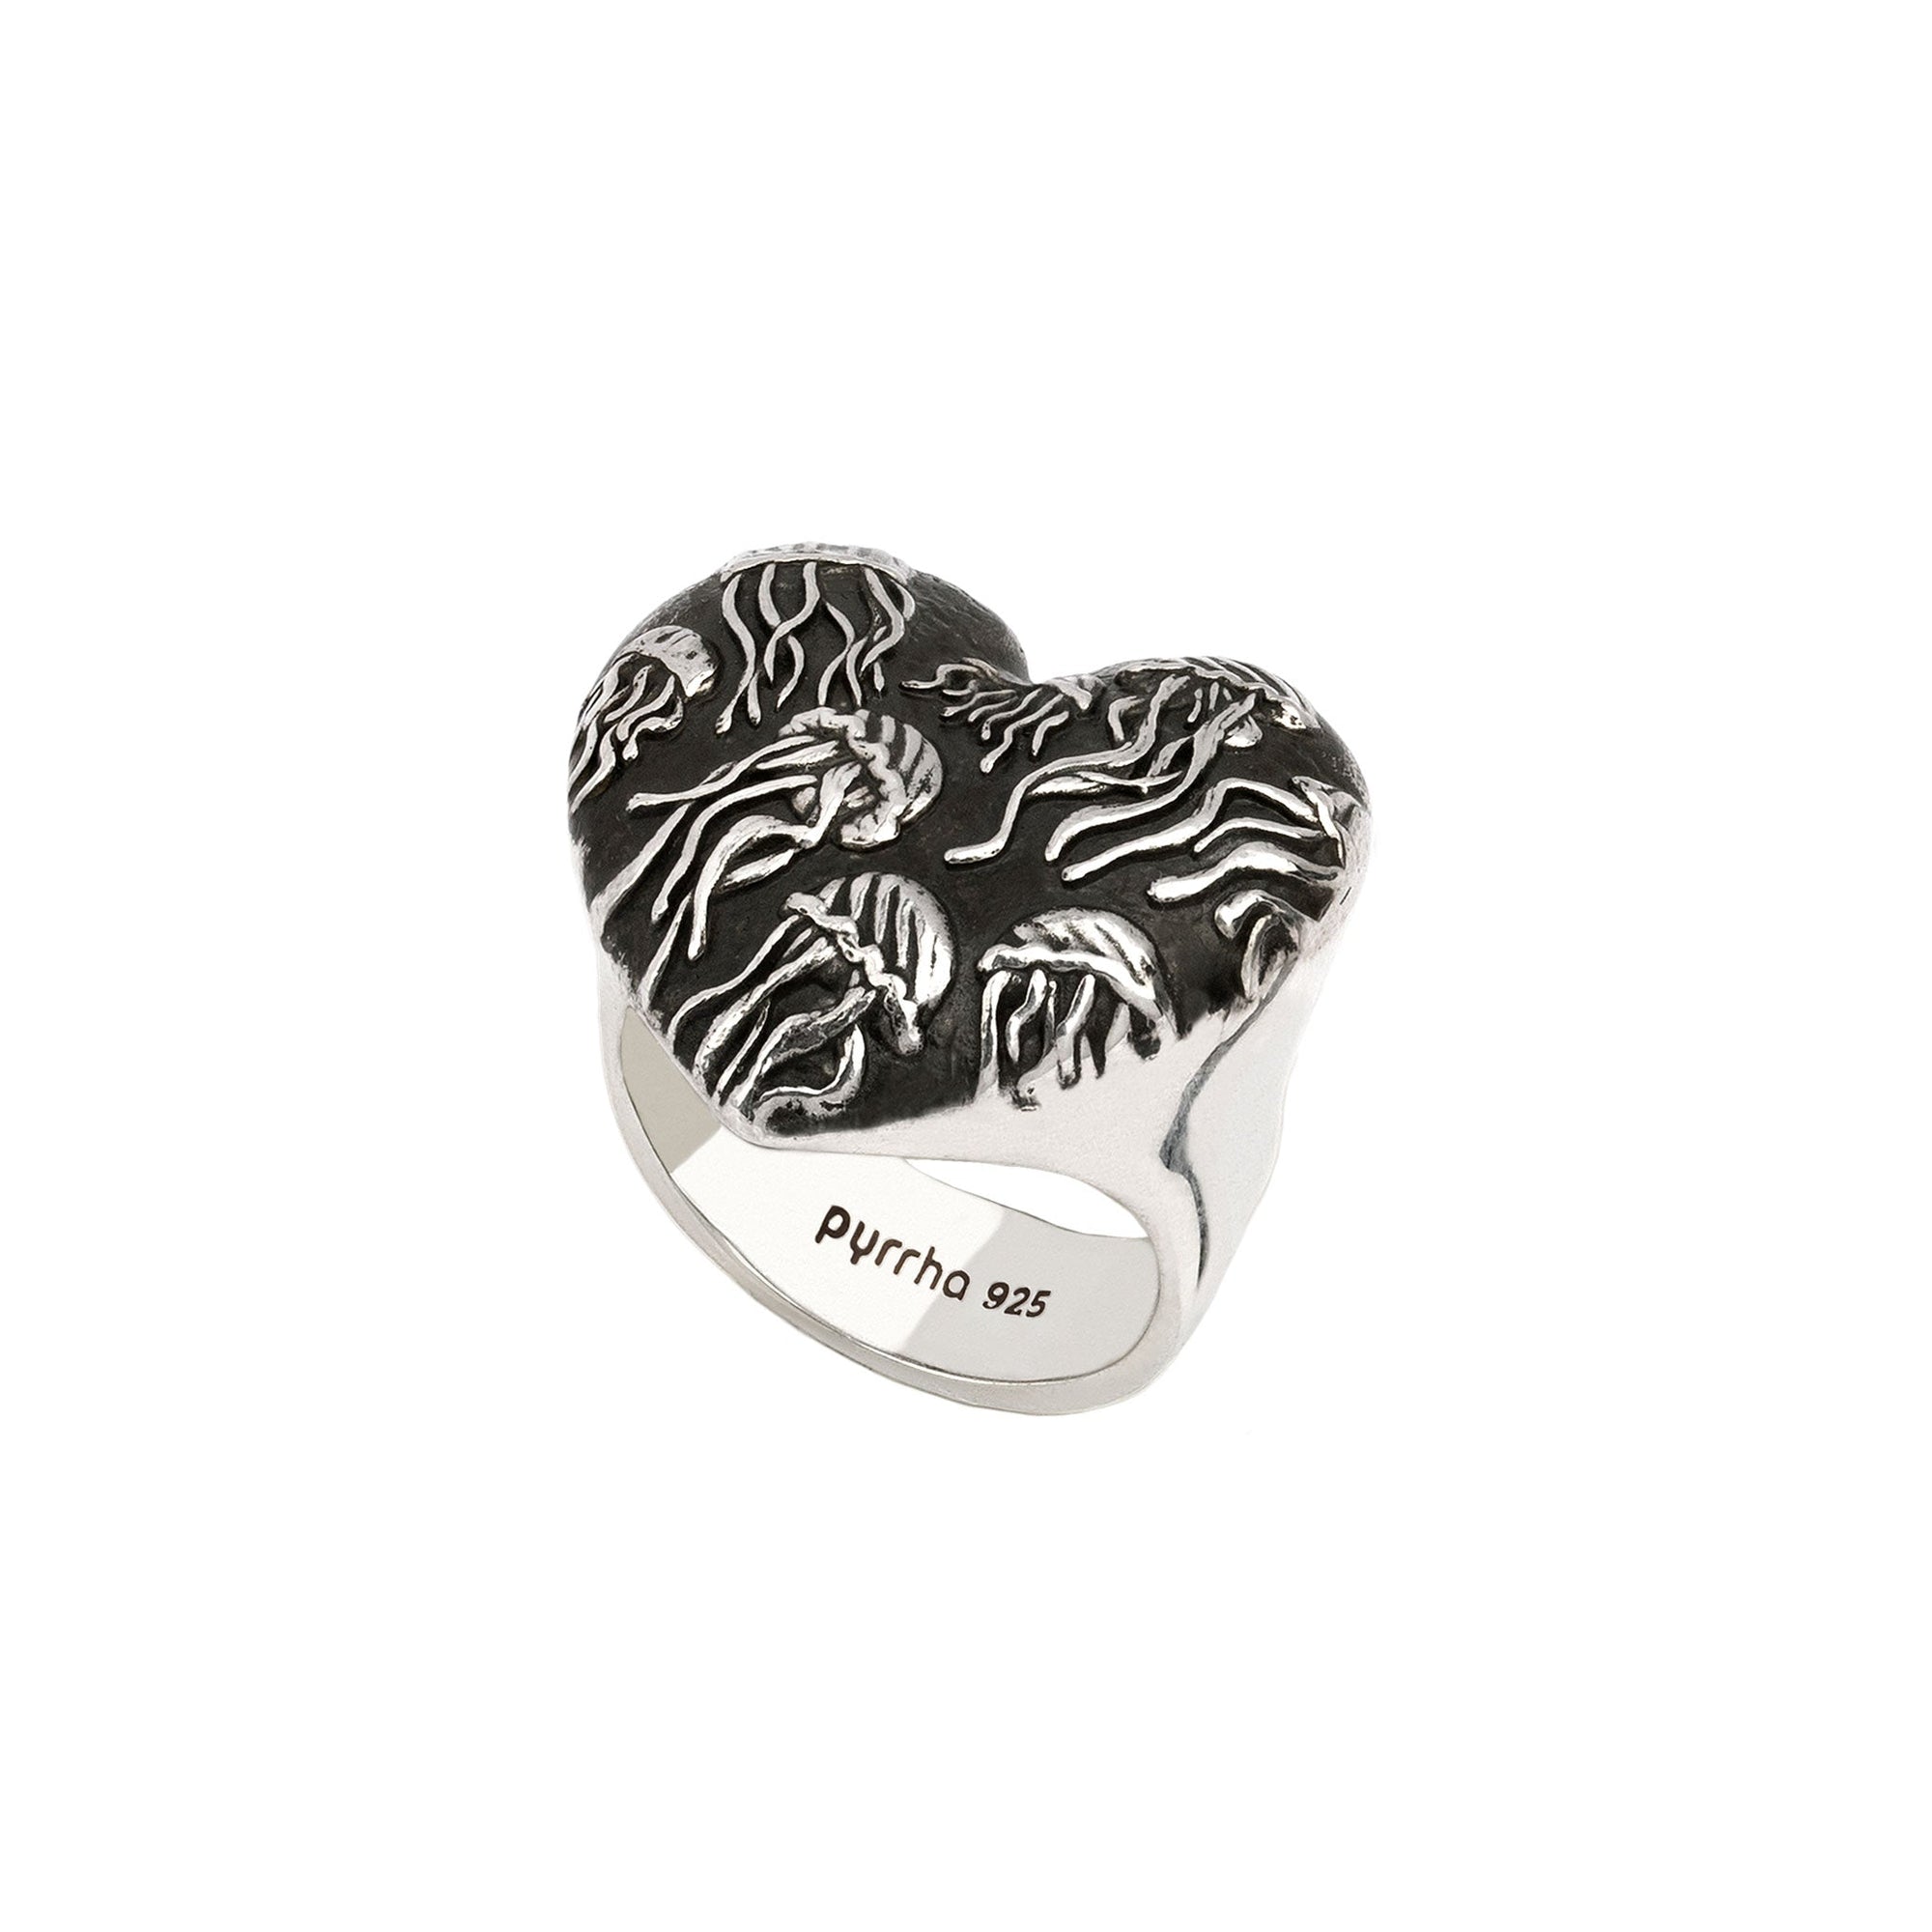 LARGE PUFFED HEART SIGNET RING